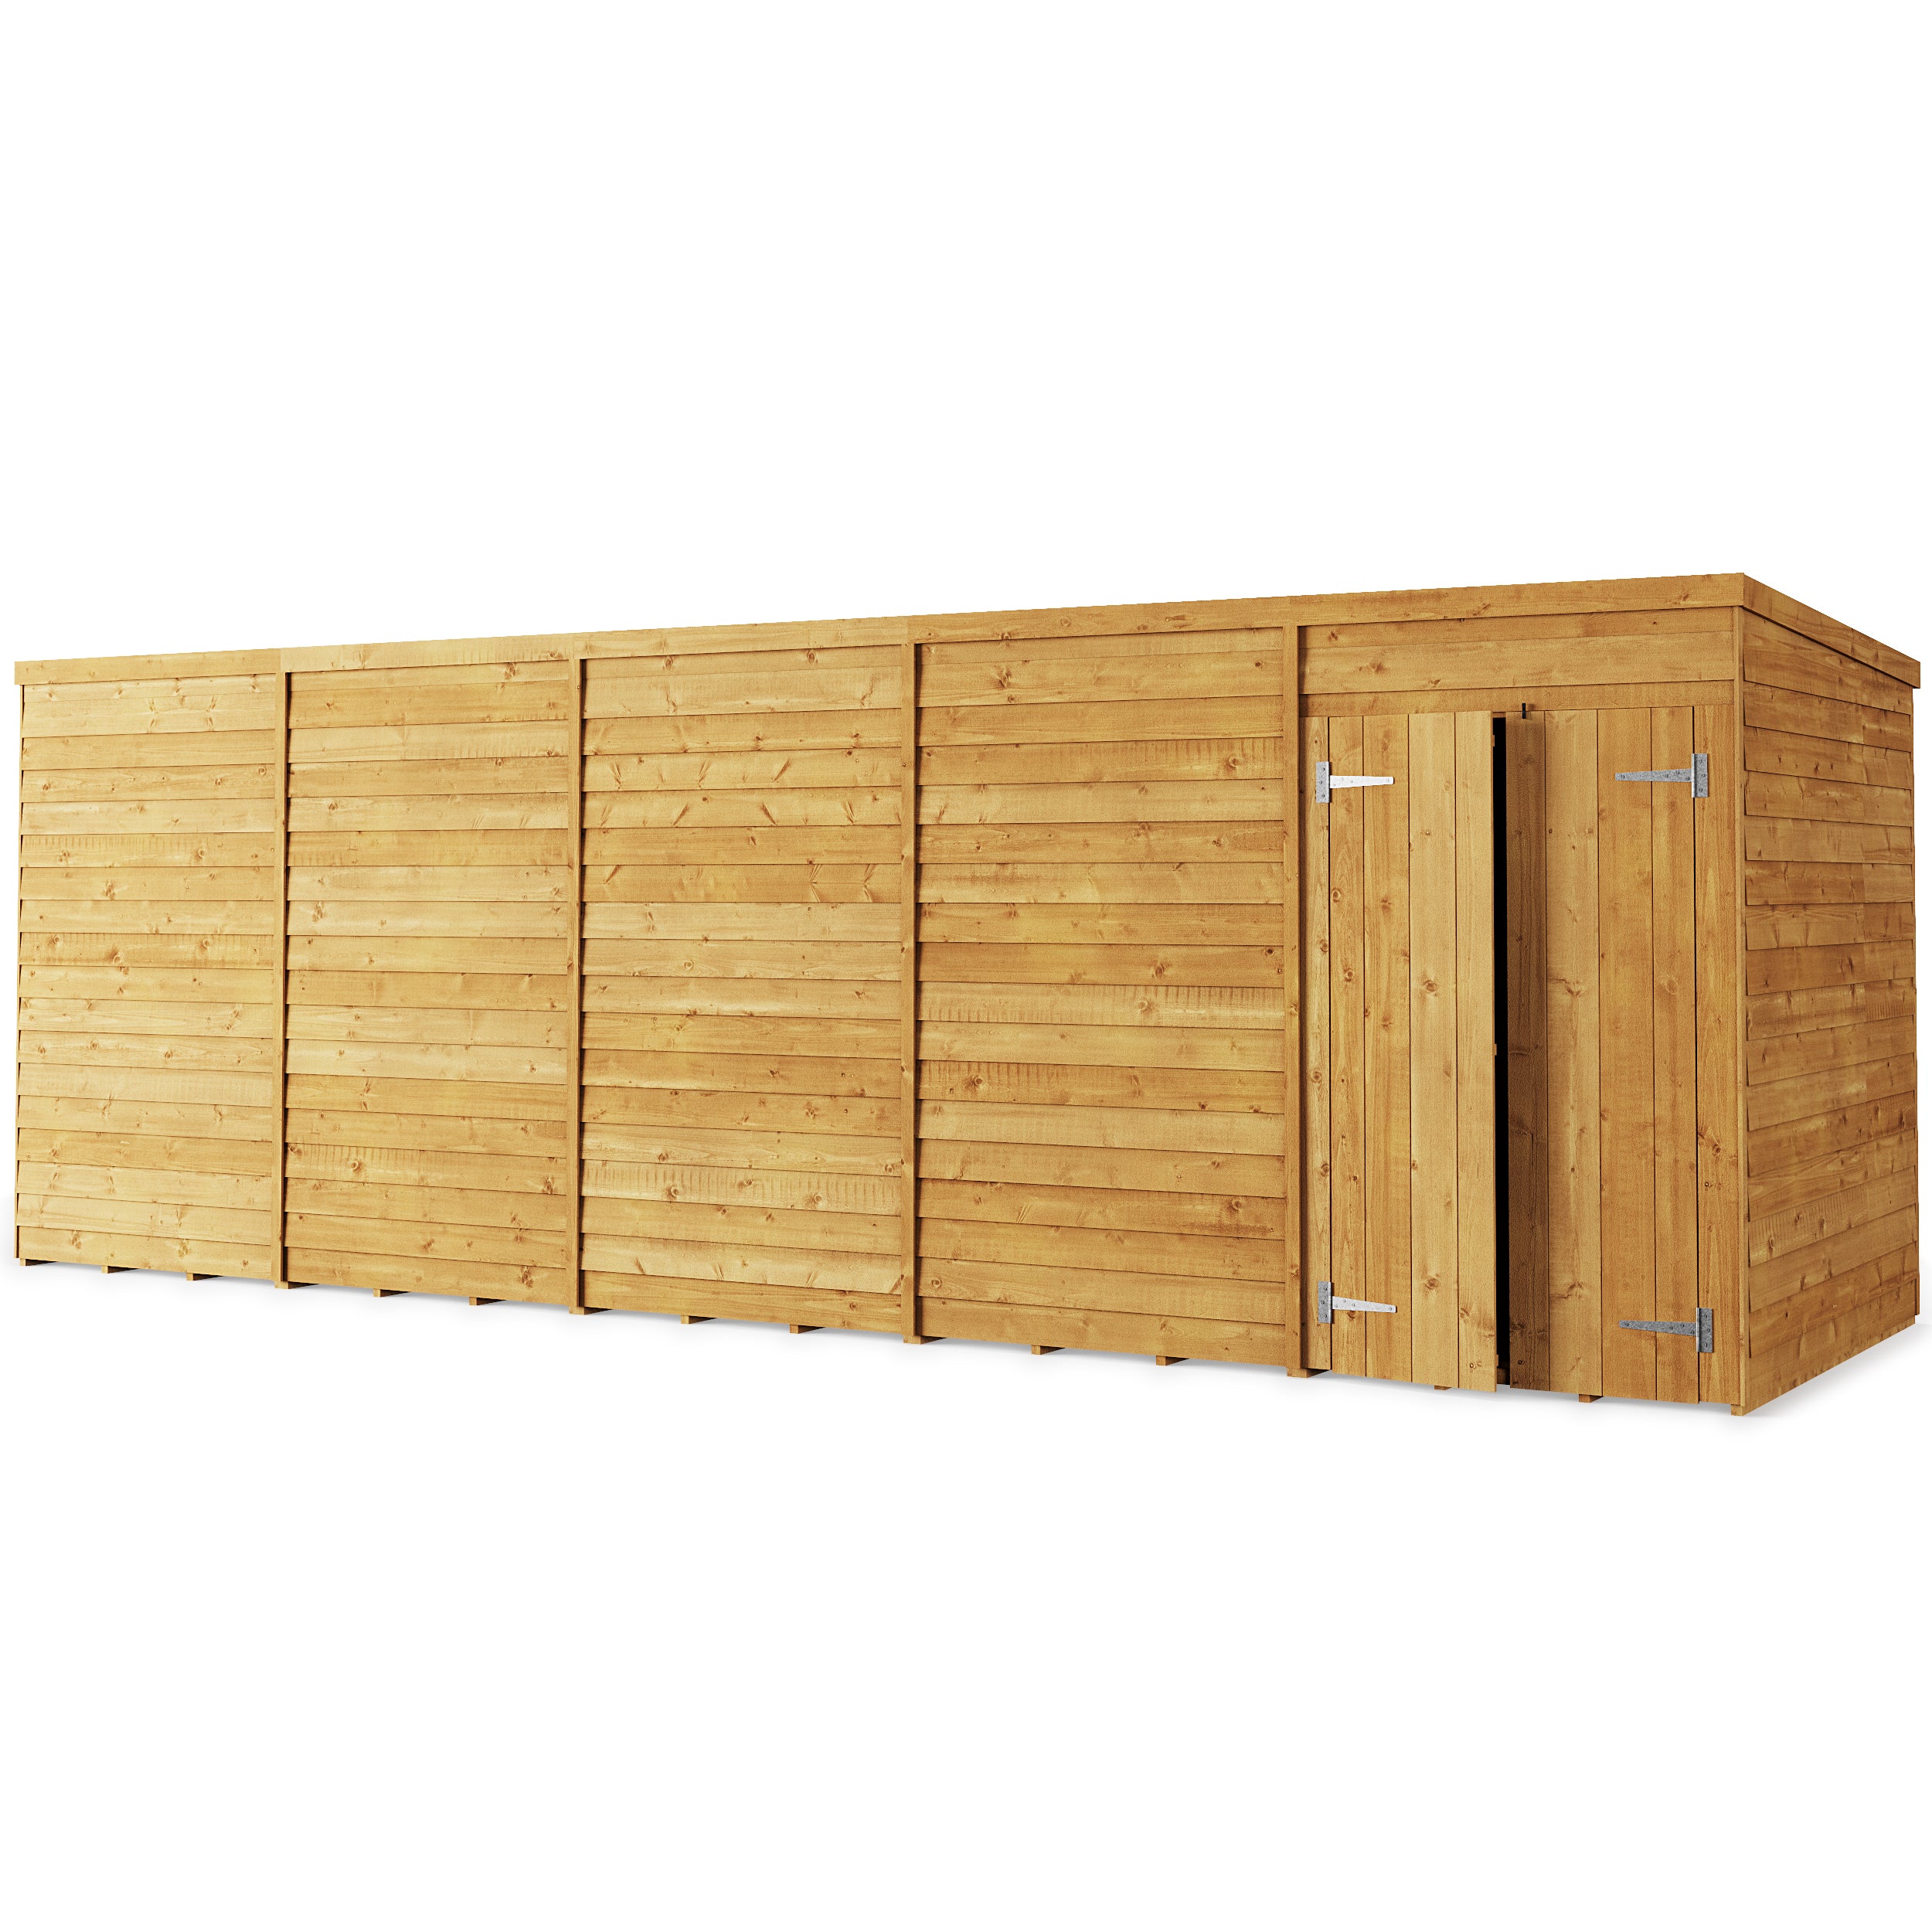 Store More Overlap Pent Shed - 20x6 Windowless